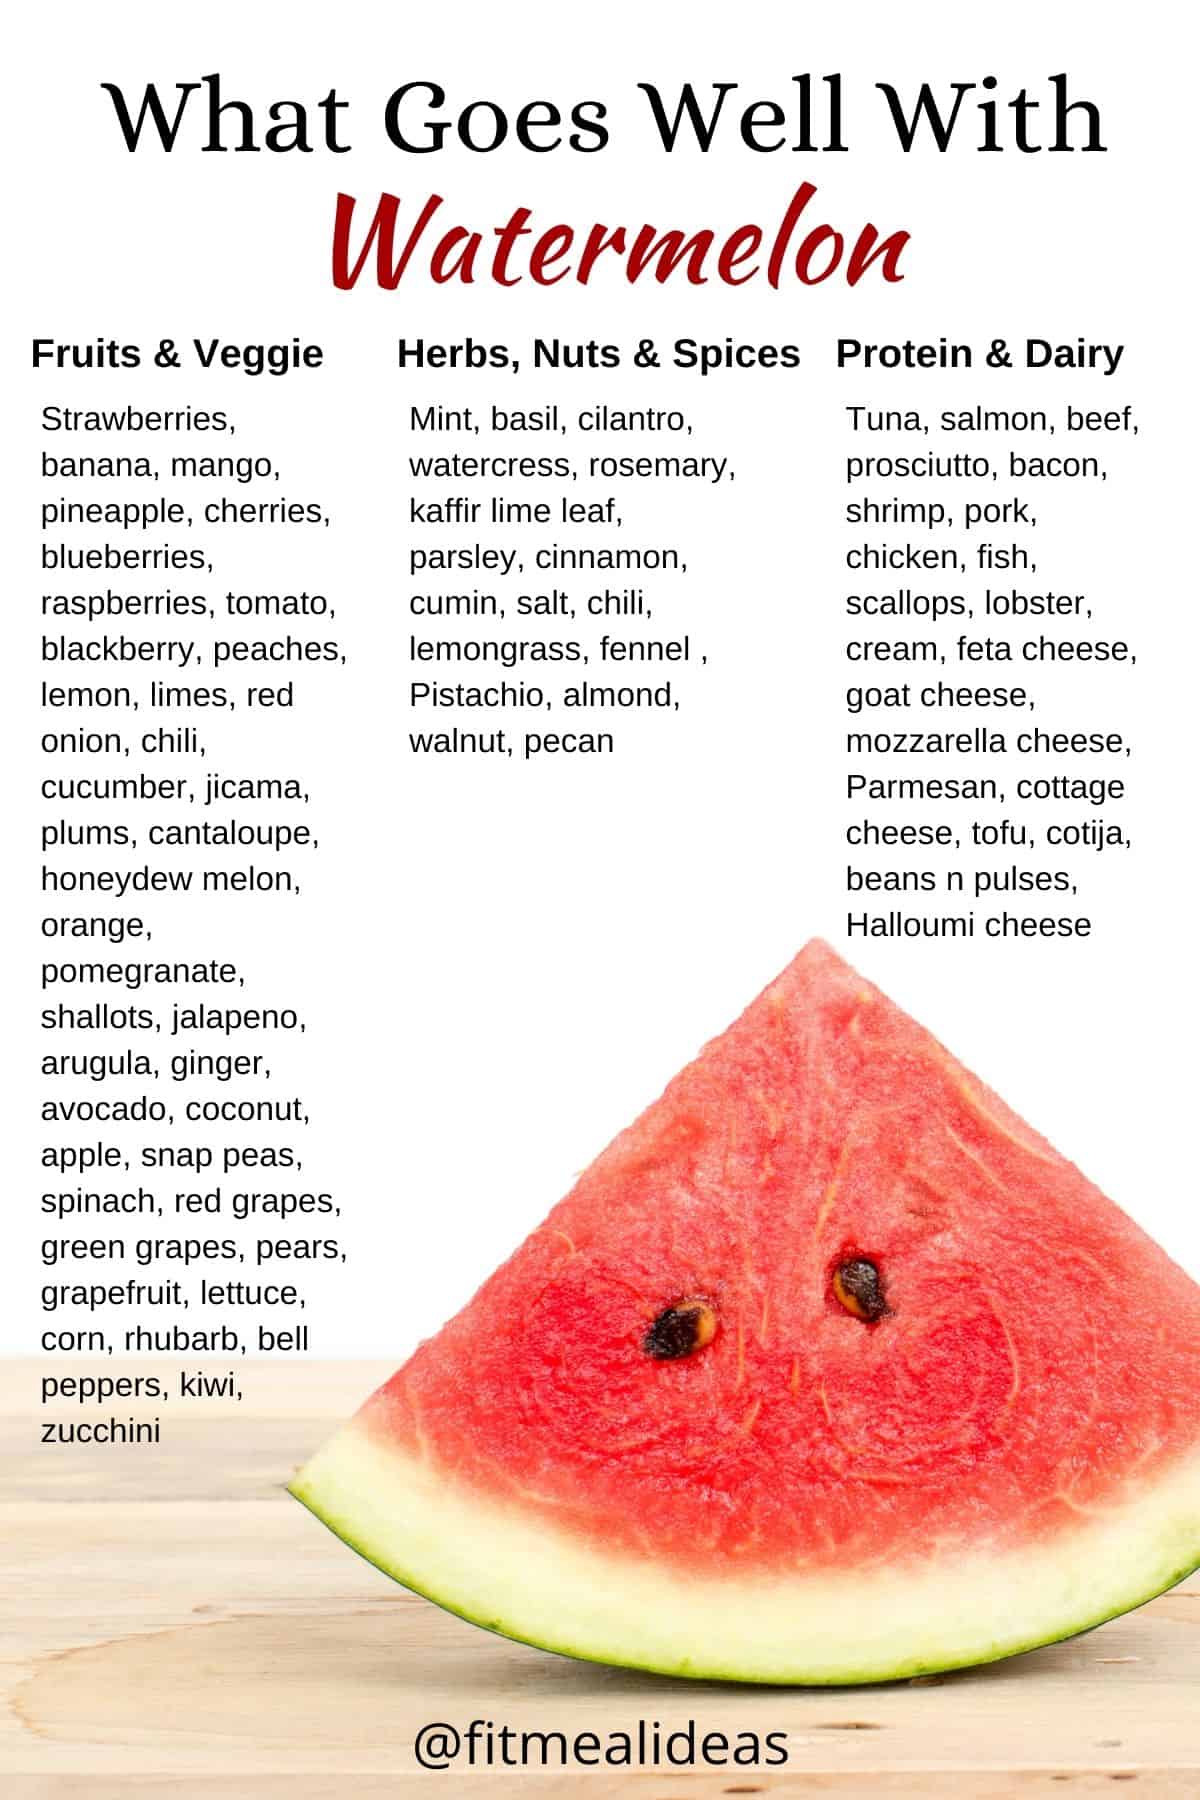 infographic that shows what are the food pairs well with watermelon.